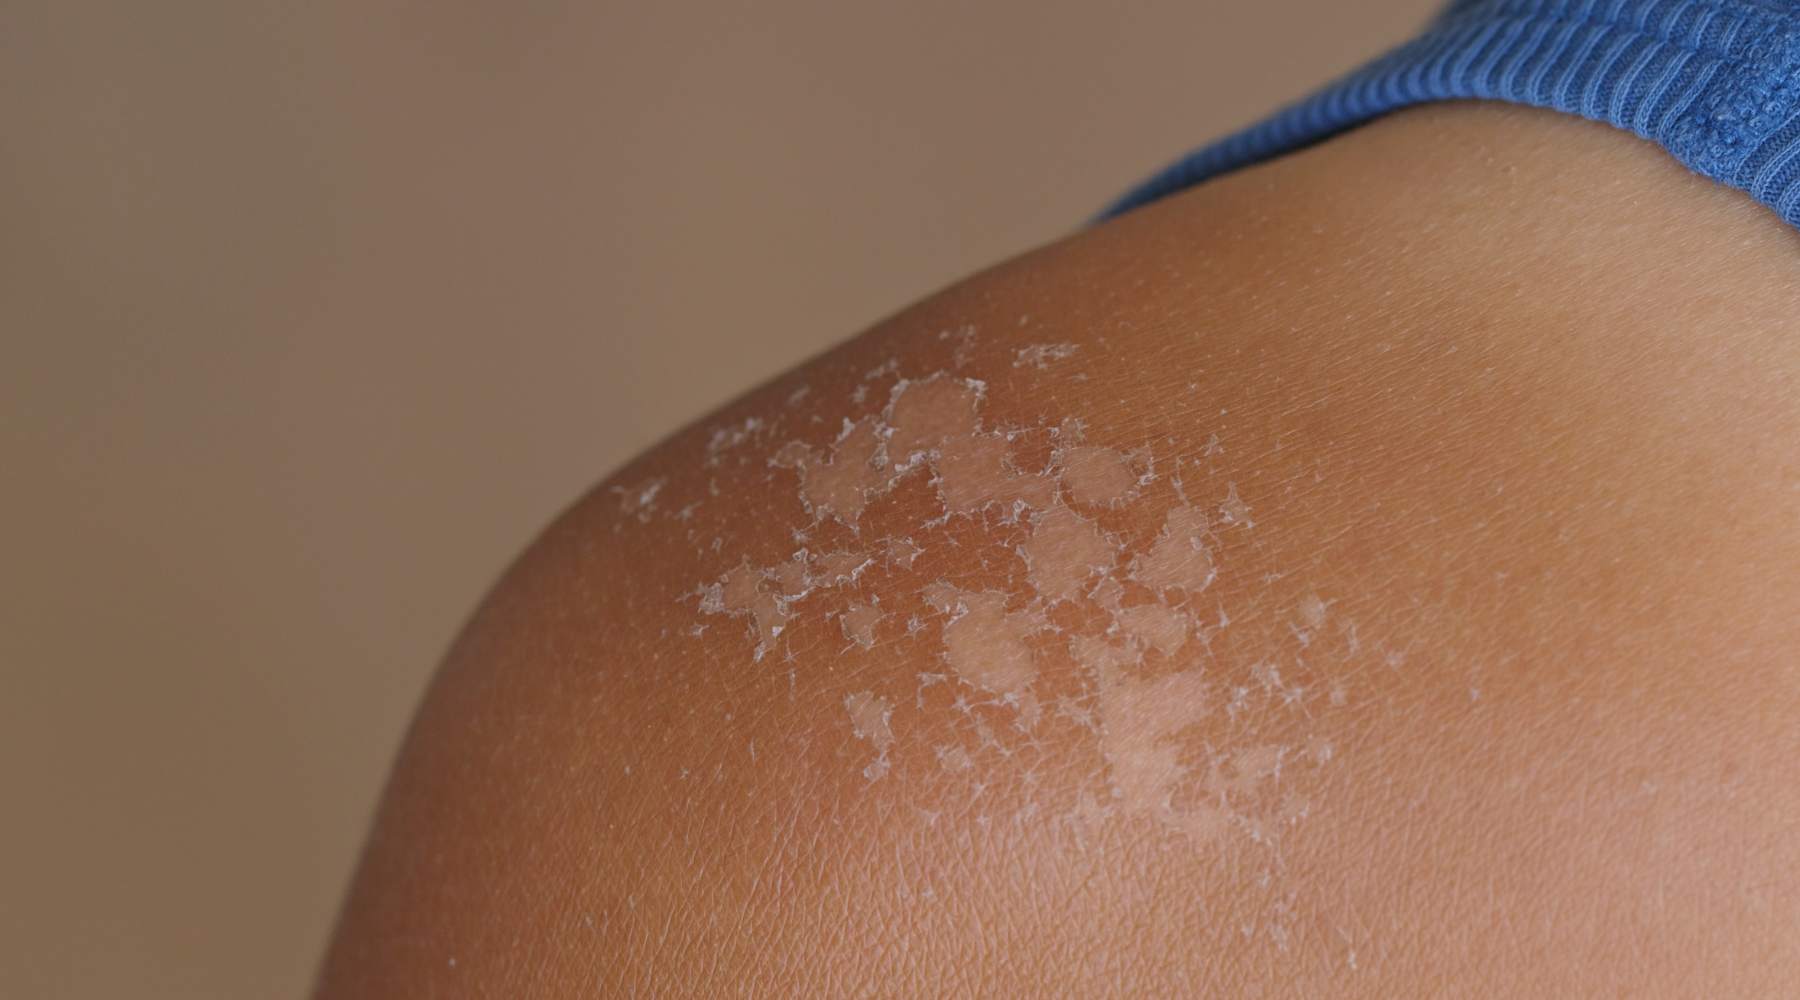 Sunburned shoulder with sun blisters—How to get rid of sun blisters